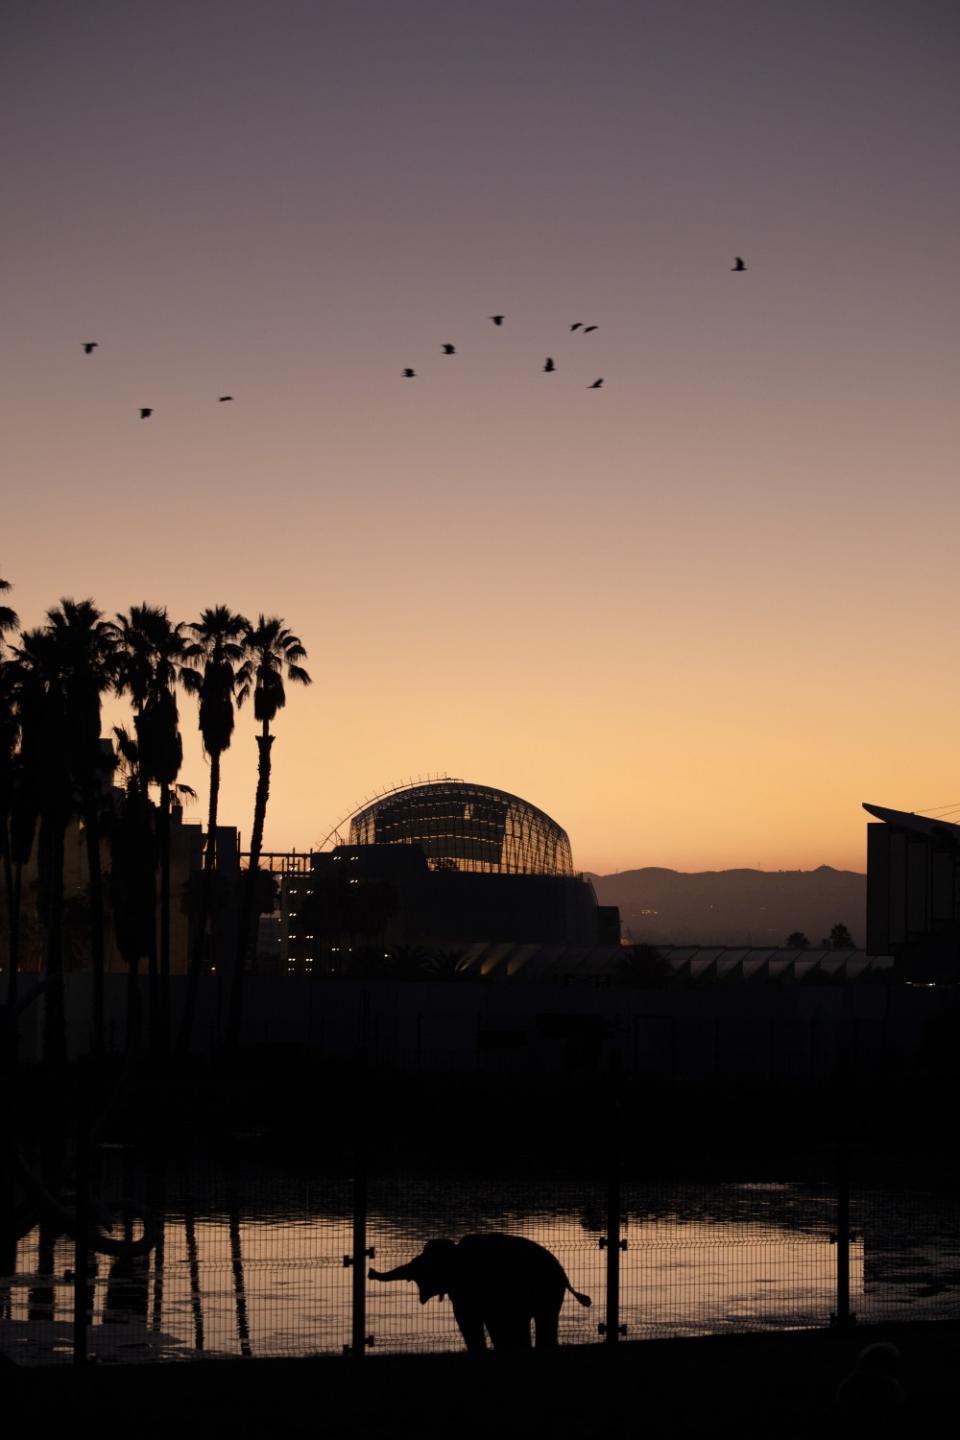 The Academy Museum of Motion Pictures, as seen at sunset from the neighboring La Brea tar pits